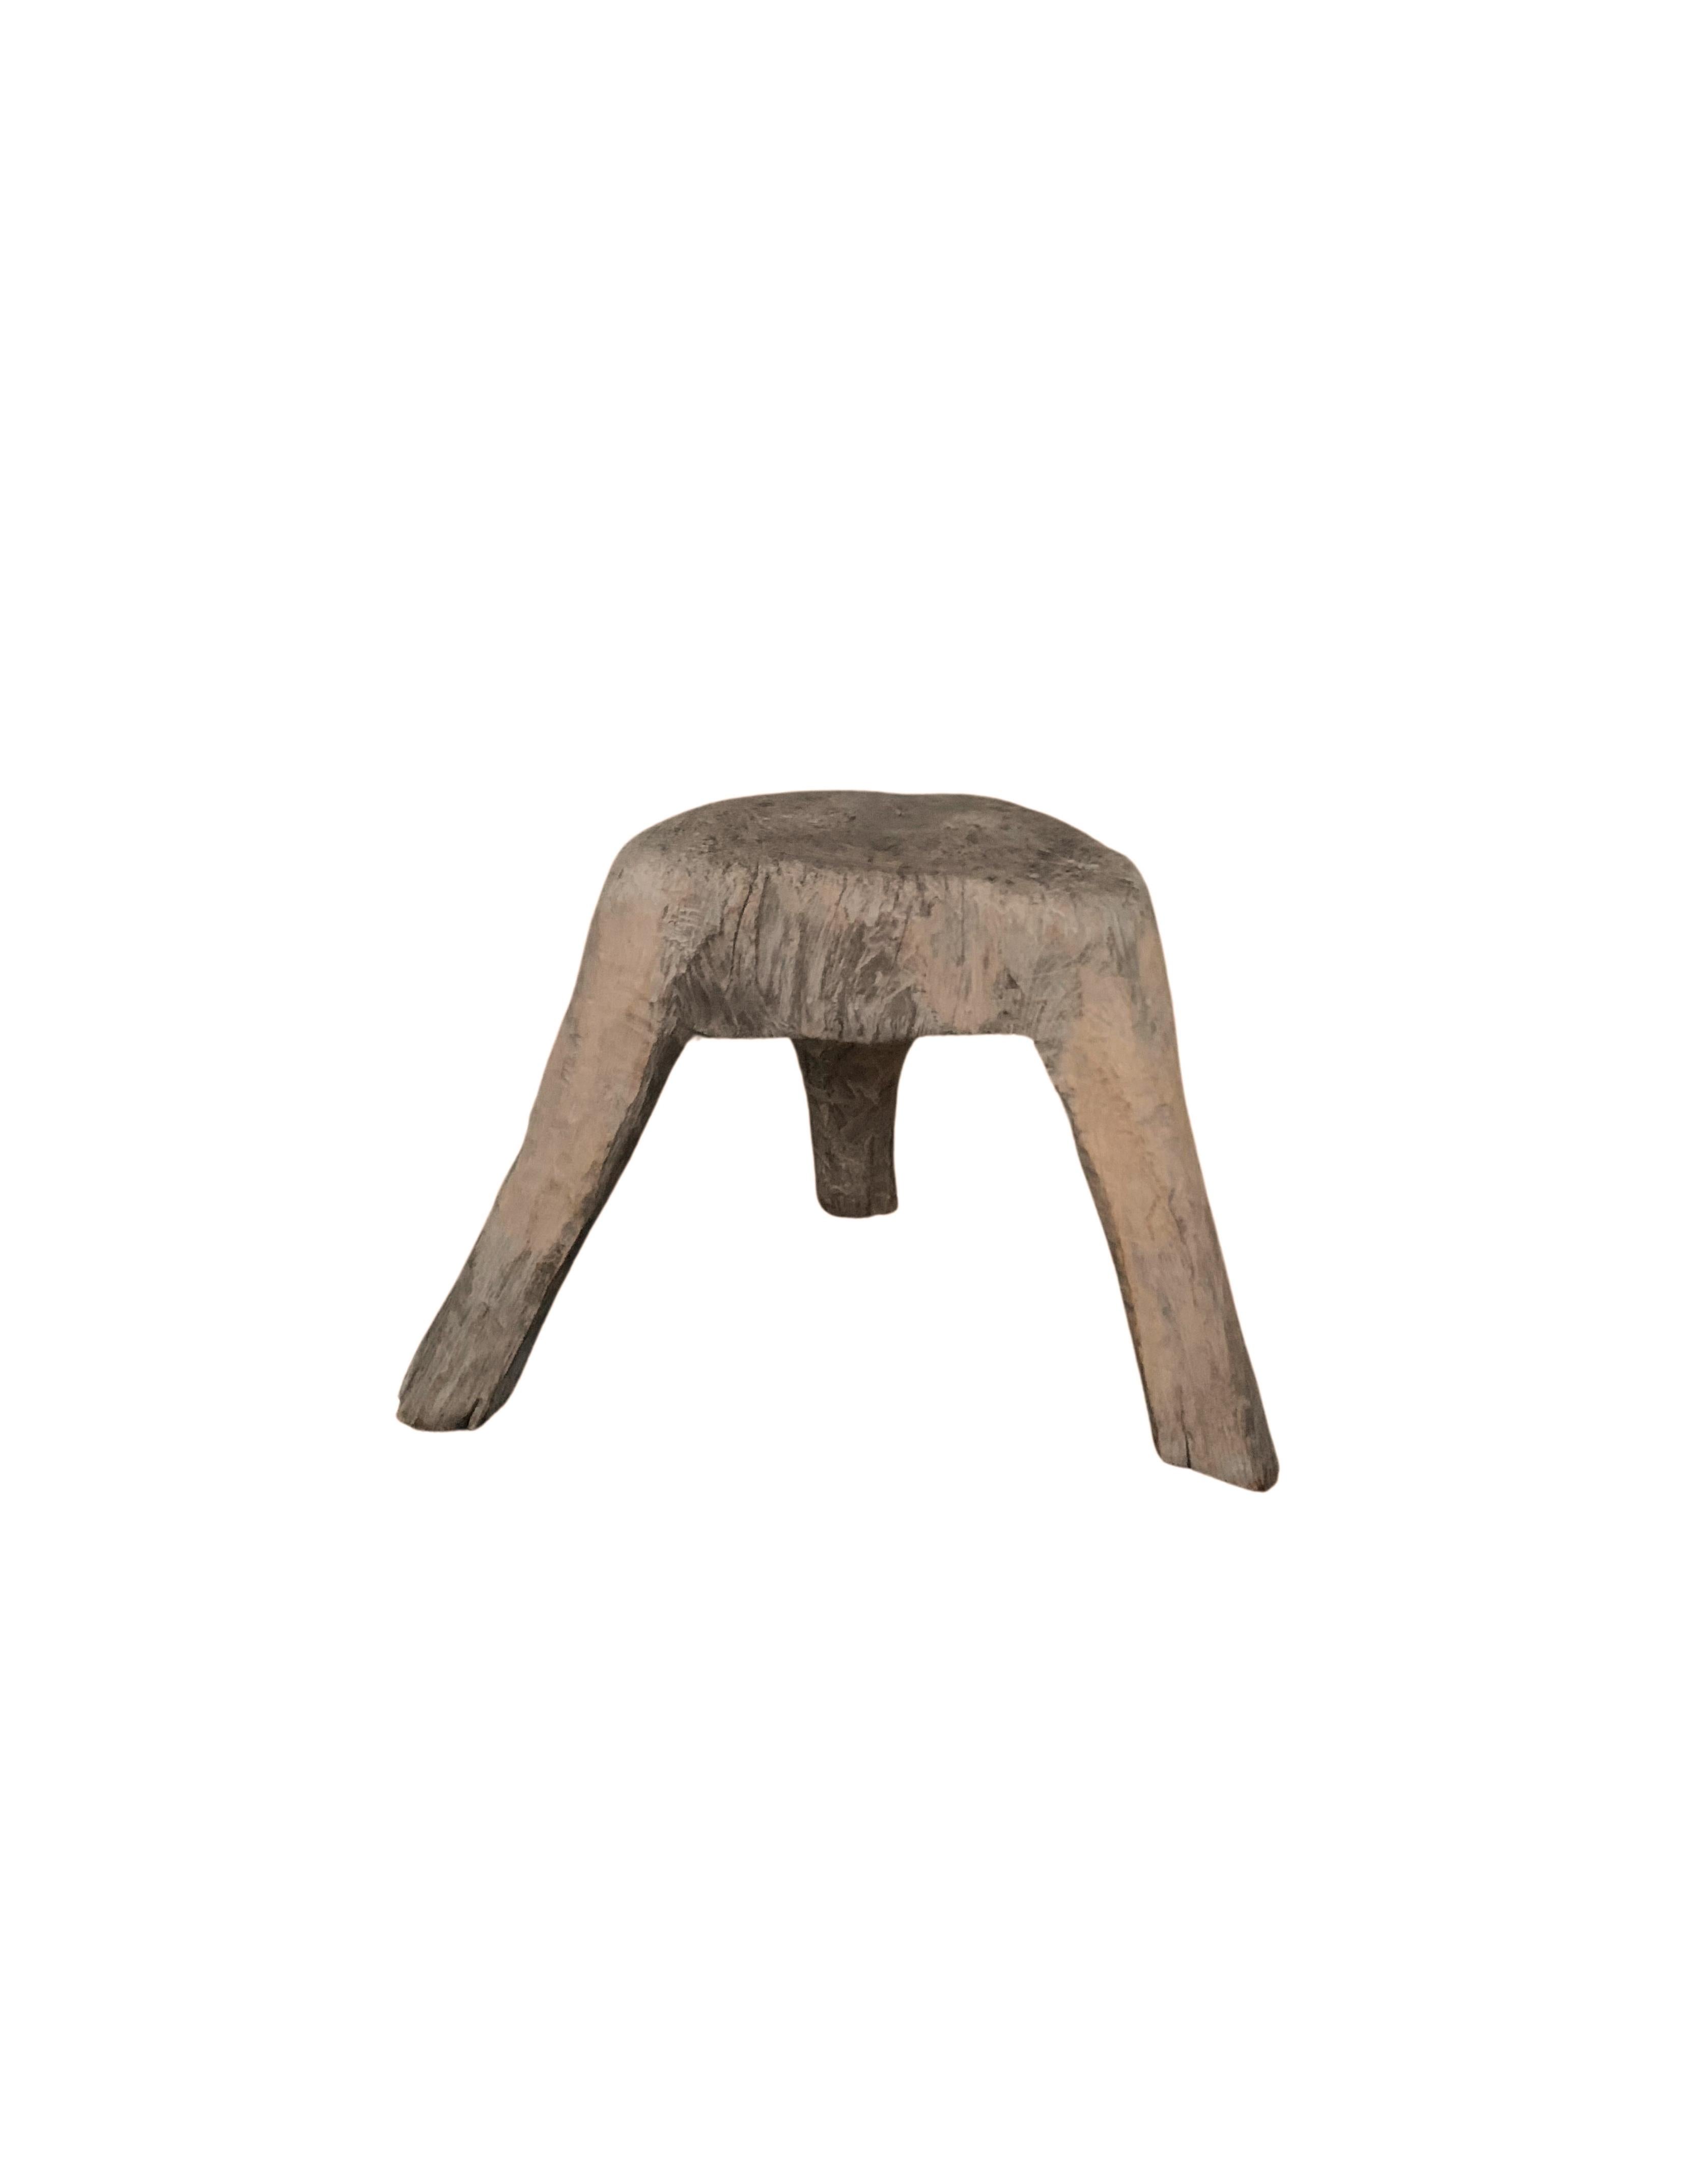 Hand-Crafted Solid Sculptural Organic Teak Stool Madura Island, Indonesia For Sale